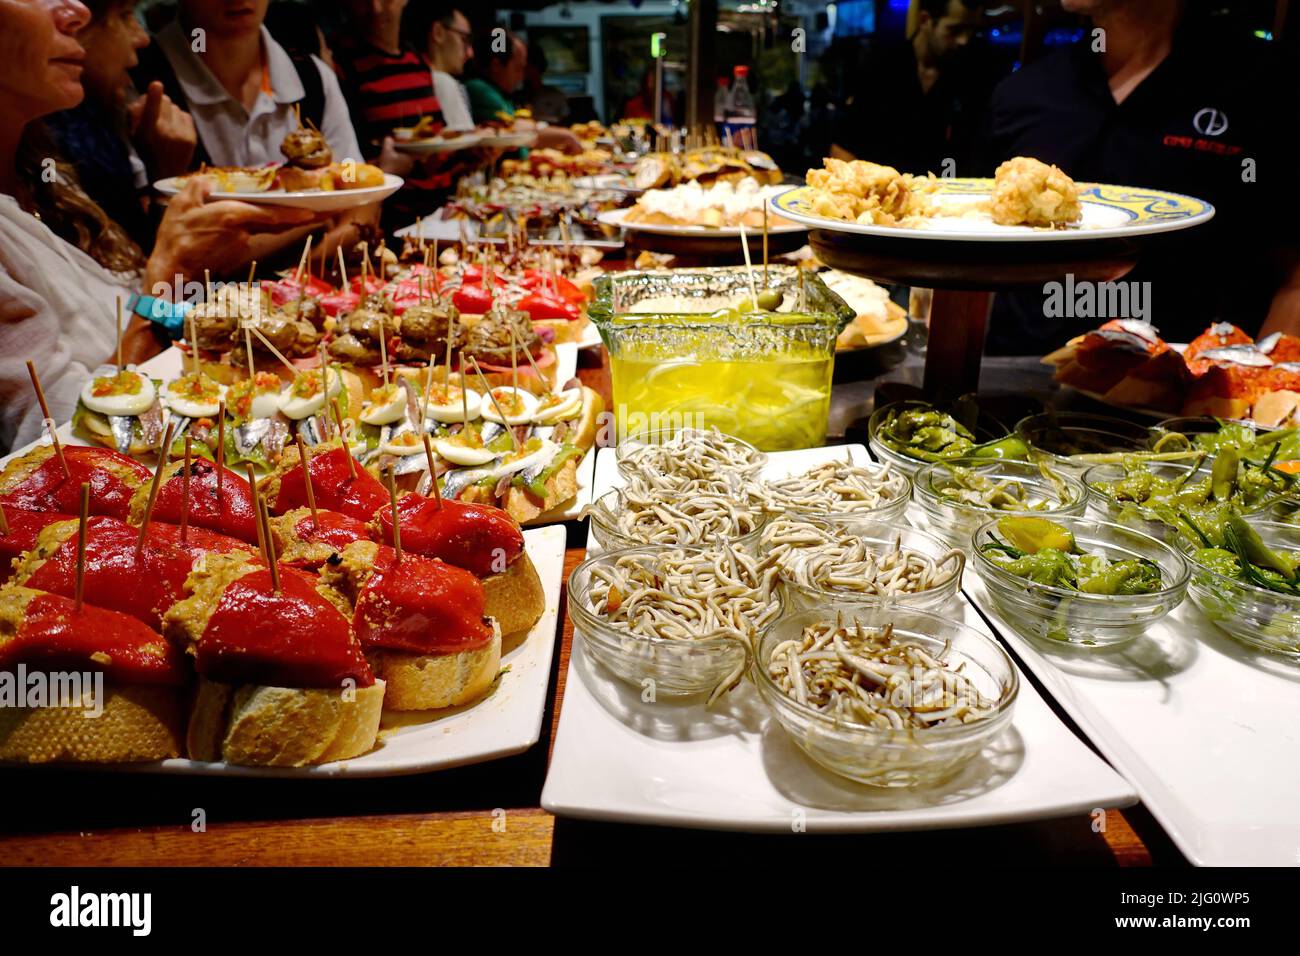 A tapas bar in San Sebastian with delicious pintxos, the traditional appetizers of the Basque country. San Sebastian, Spain - August 2018 Stock Photo